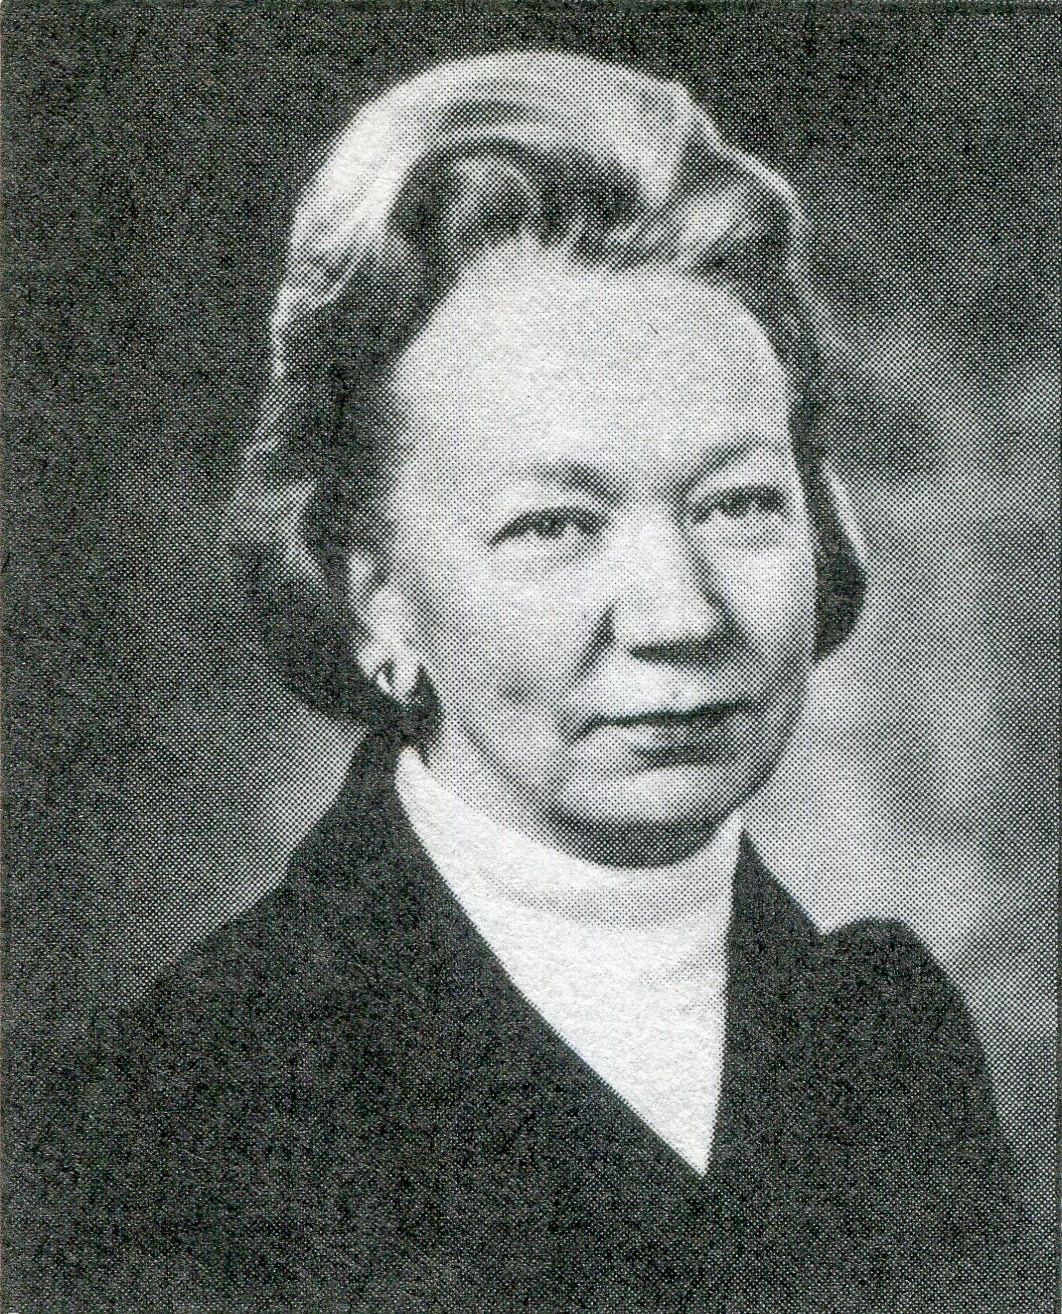 Scan of a photo of madge crouch that was originally printed in the FDA Directory